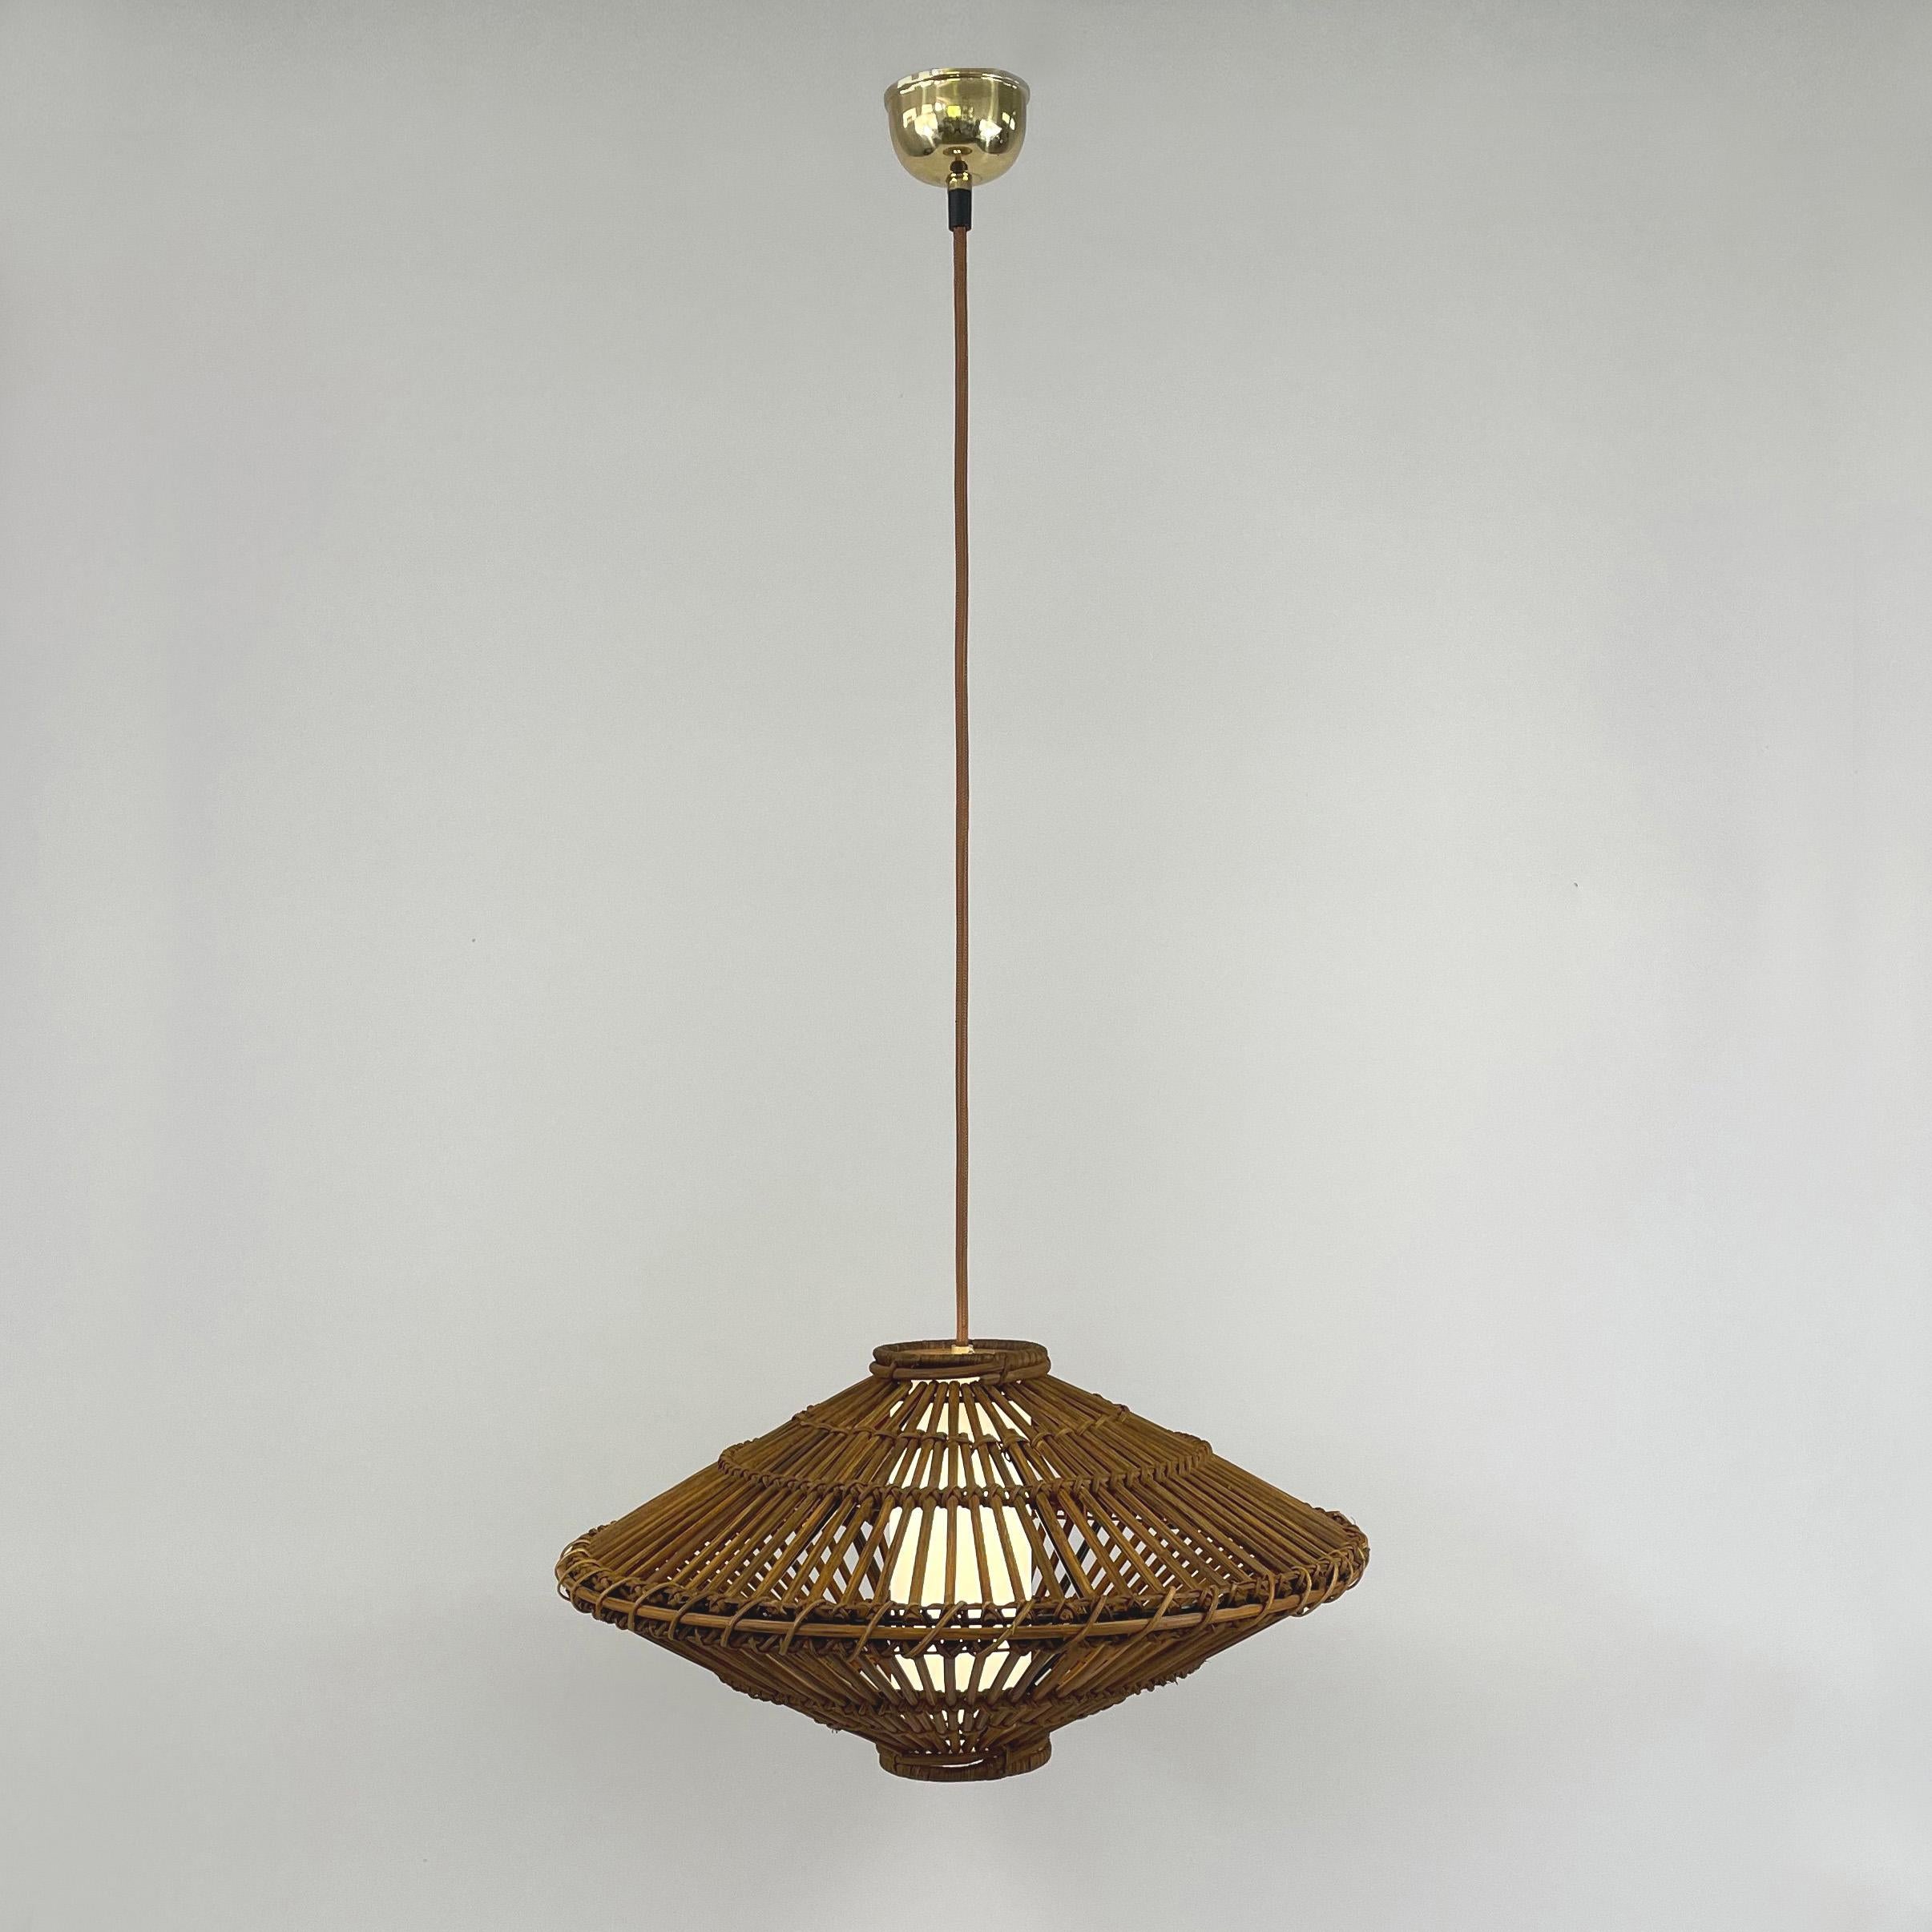 This beautiful handcrafted pendant was designed and manufactured in France in the 1960s. It features a large rattan lampshade, light brown silk cord and an off-white linen covered diffuser. Brass canopy.

The light has been rewired with new fabric